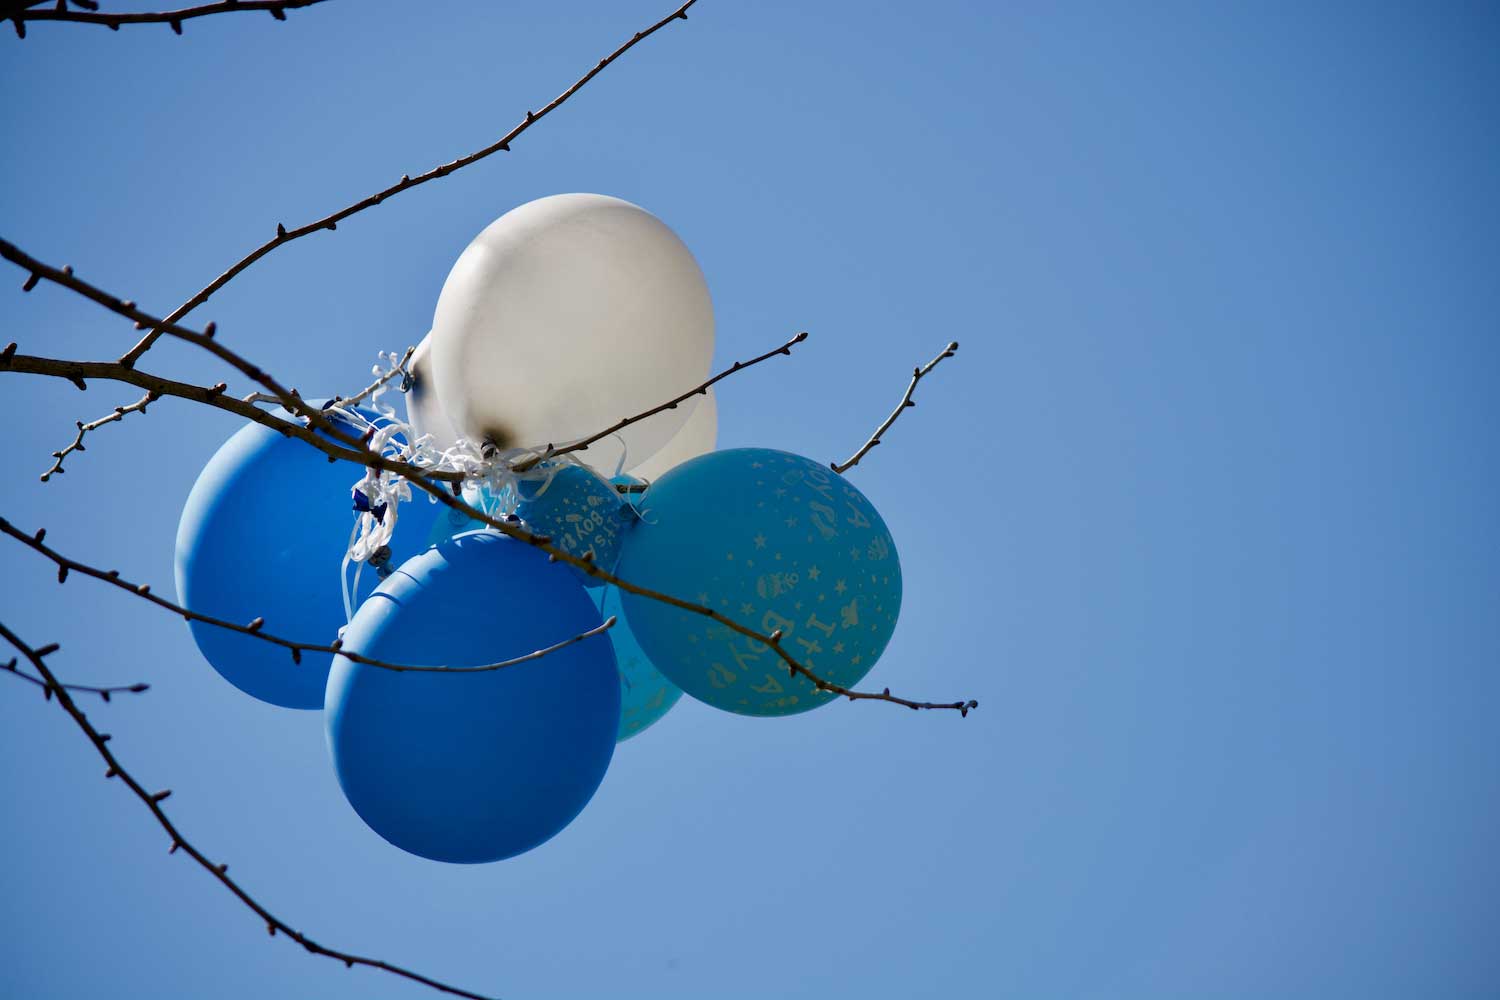 Four balloons stuck in a tree.